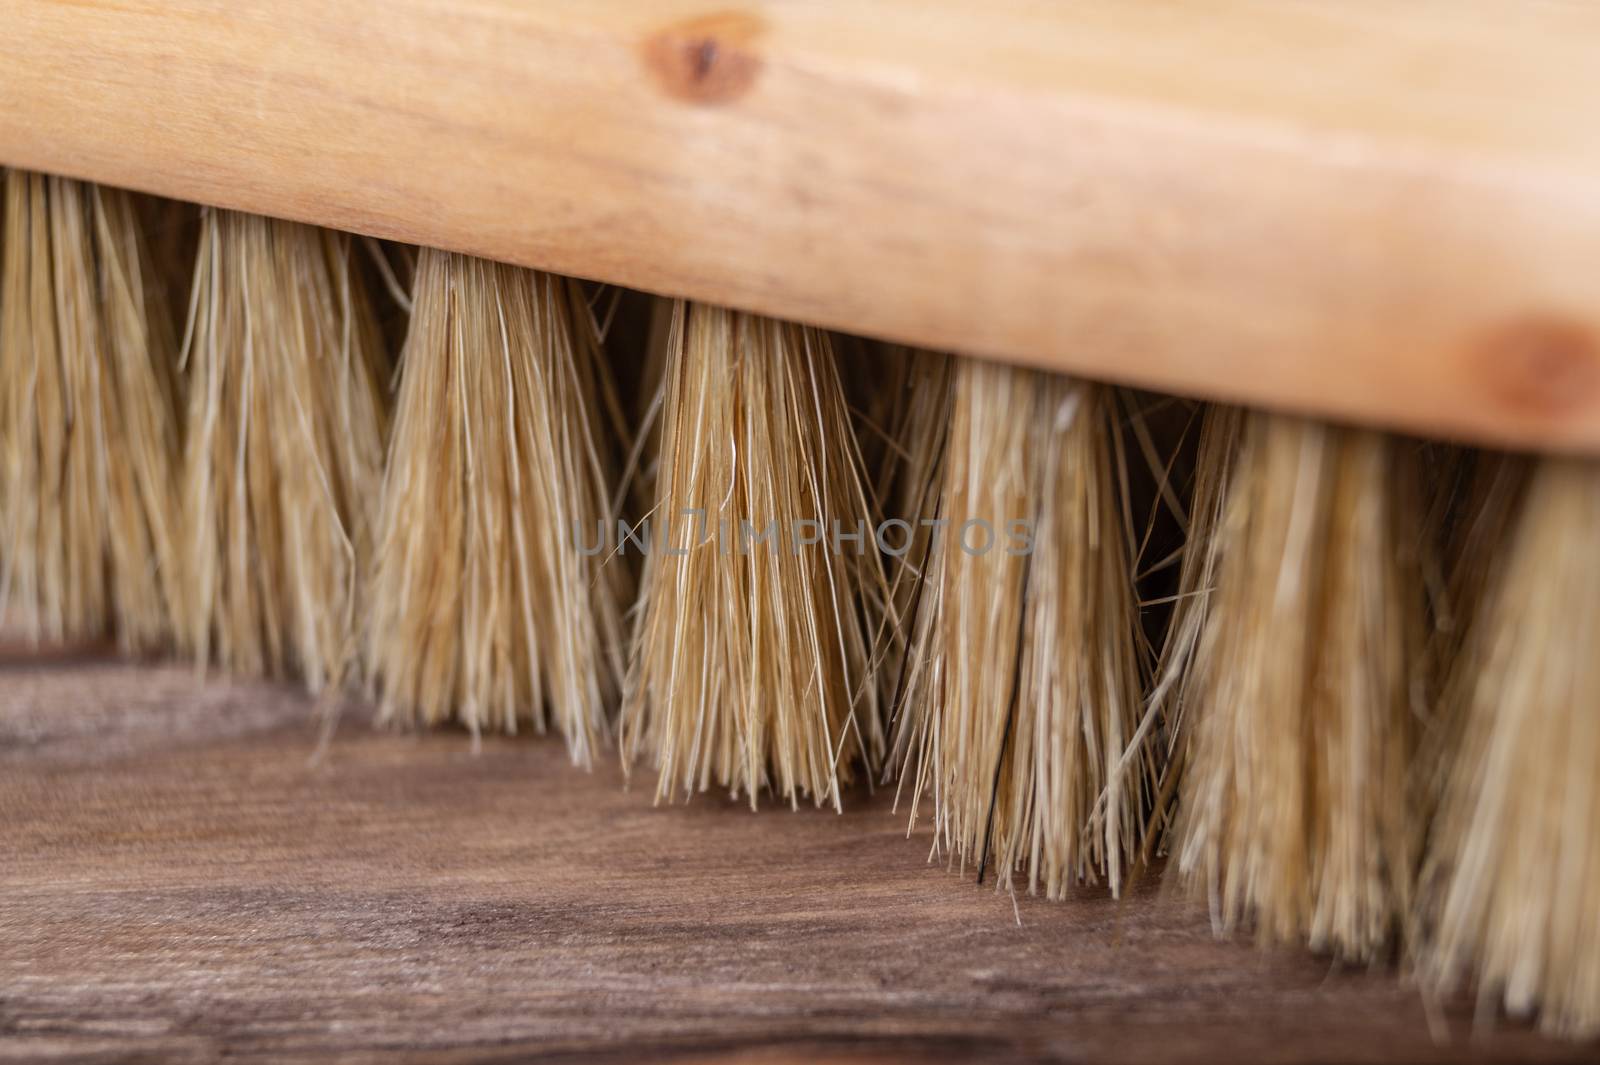 Vintage shoe brush with wooden handle on wooden background. Close up view with small depth of field.